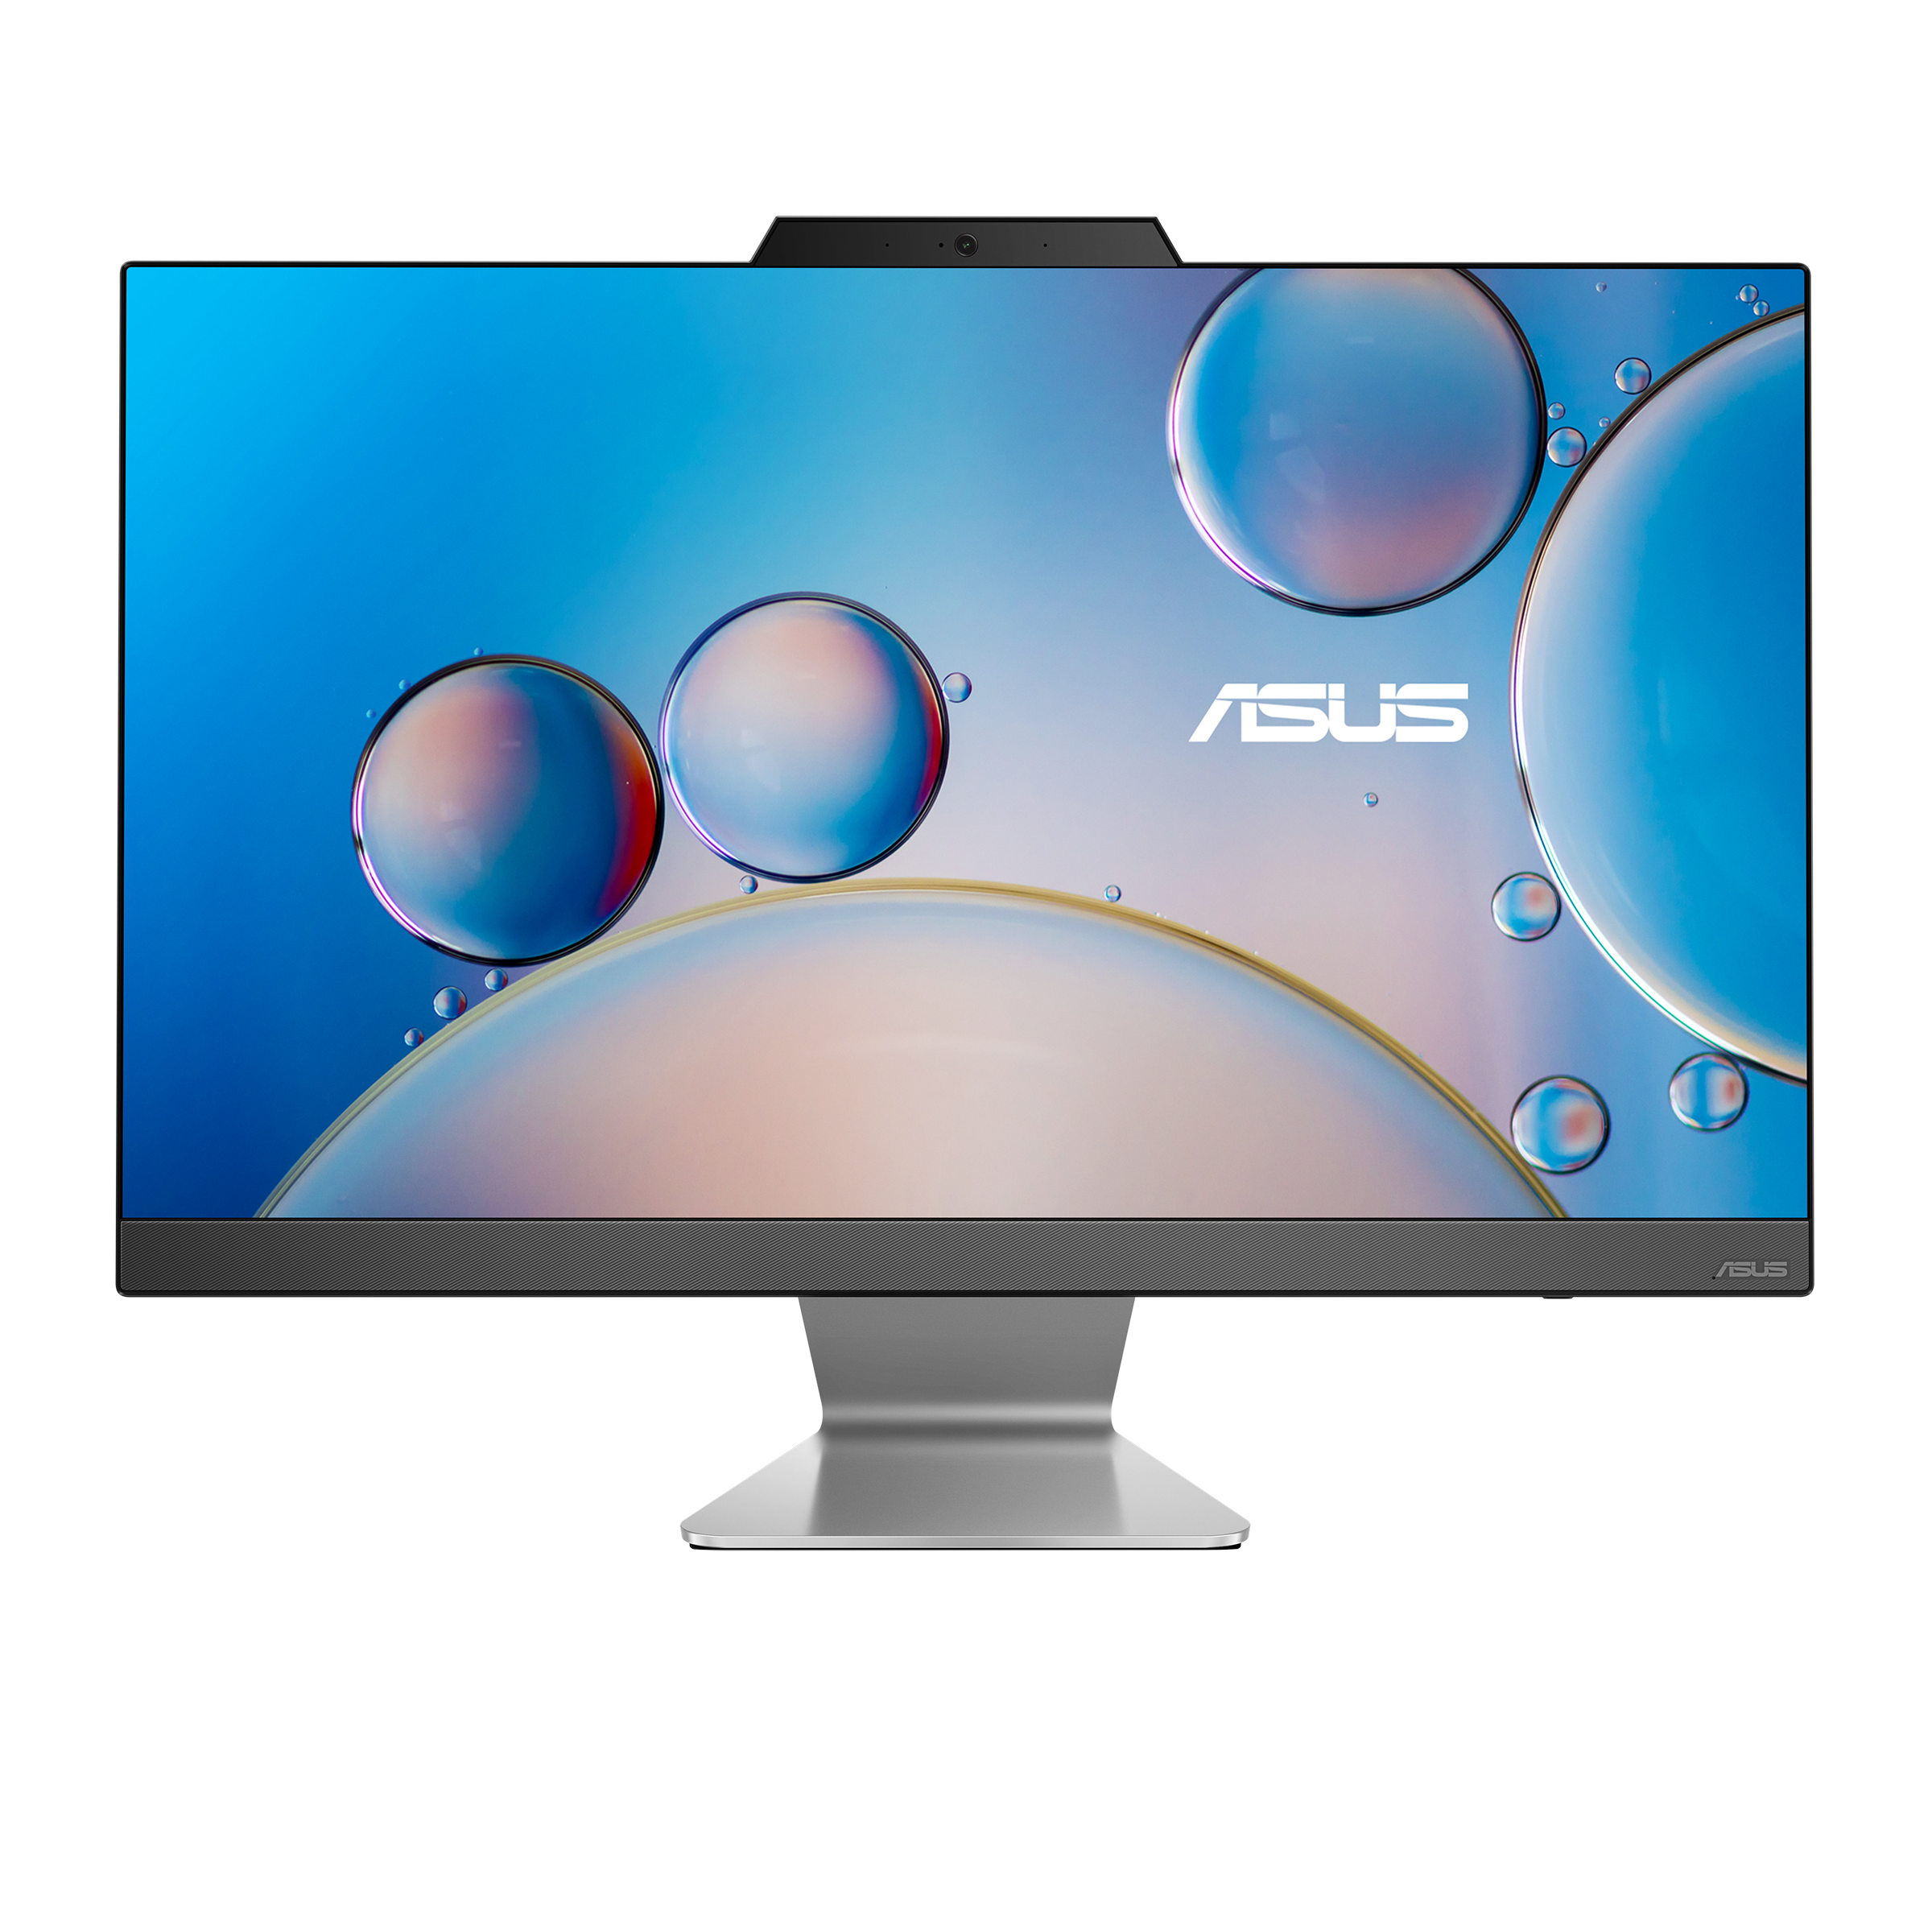 ASUS A3402 | Everyday use | 液晶一体型パソコン | ディスプレイ ...